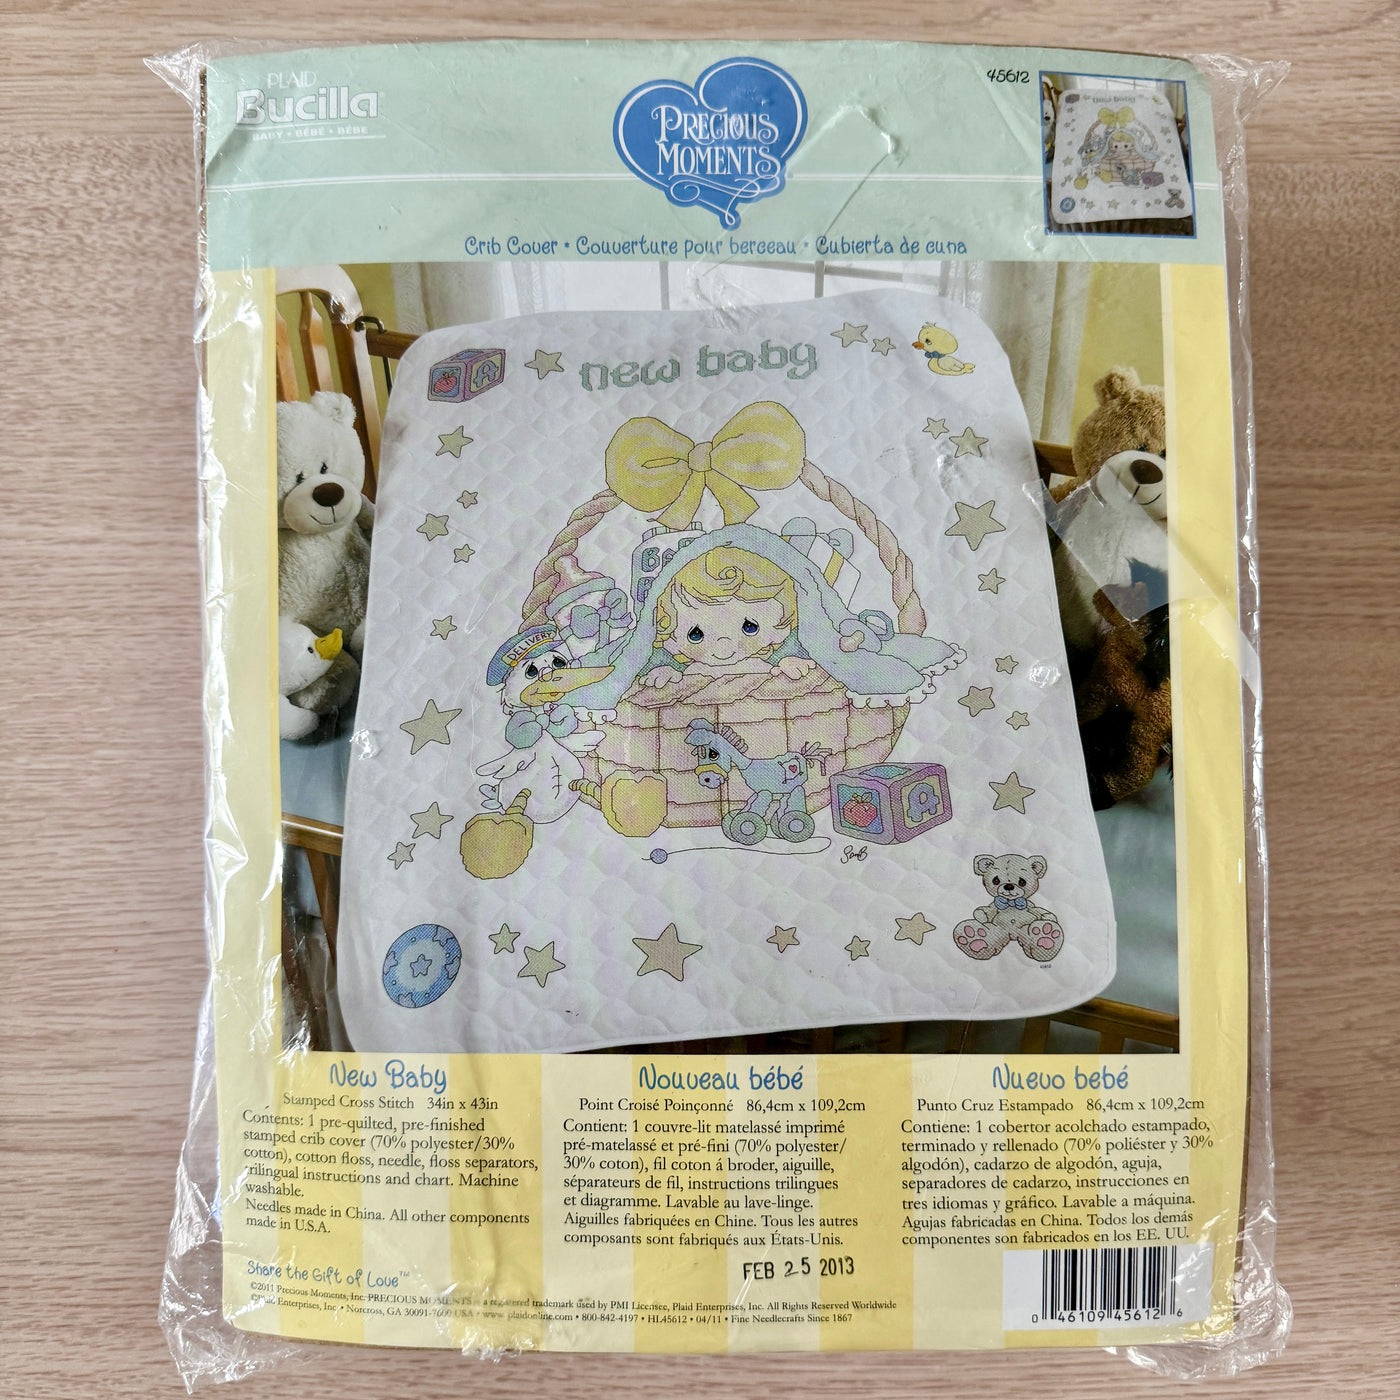 Precious Moments Little One Keepsakes Baby Quilt Stamped Cross Stitch Kit